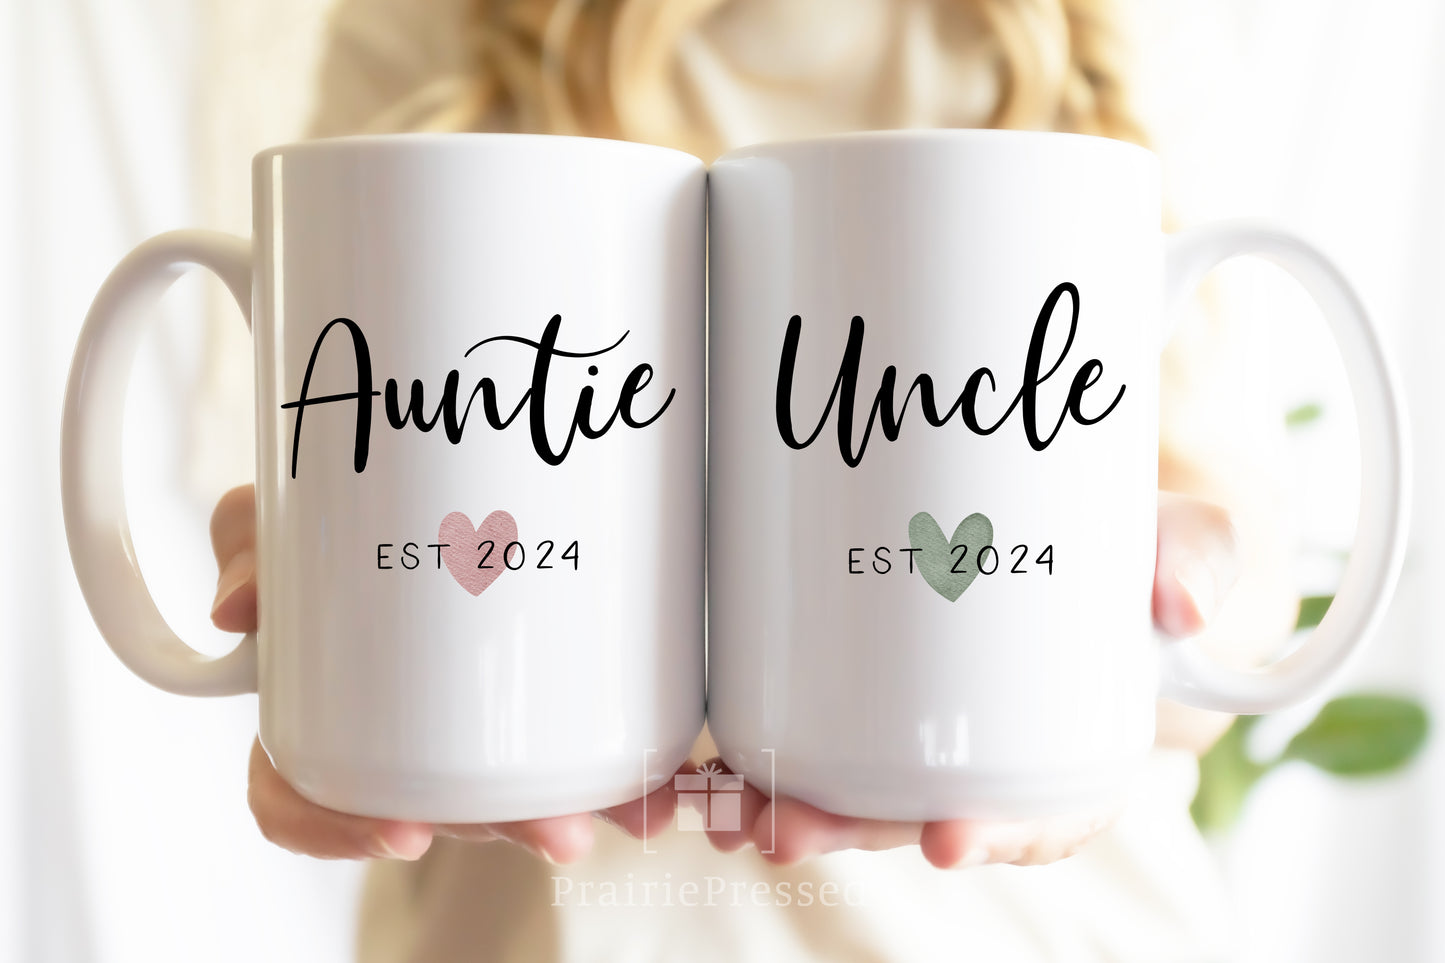 Aunt and Uncle with Est. Date and cute heart - Ceramic Mug Set